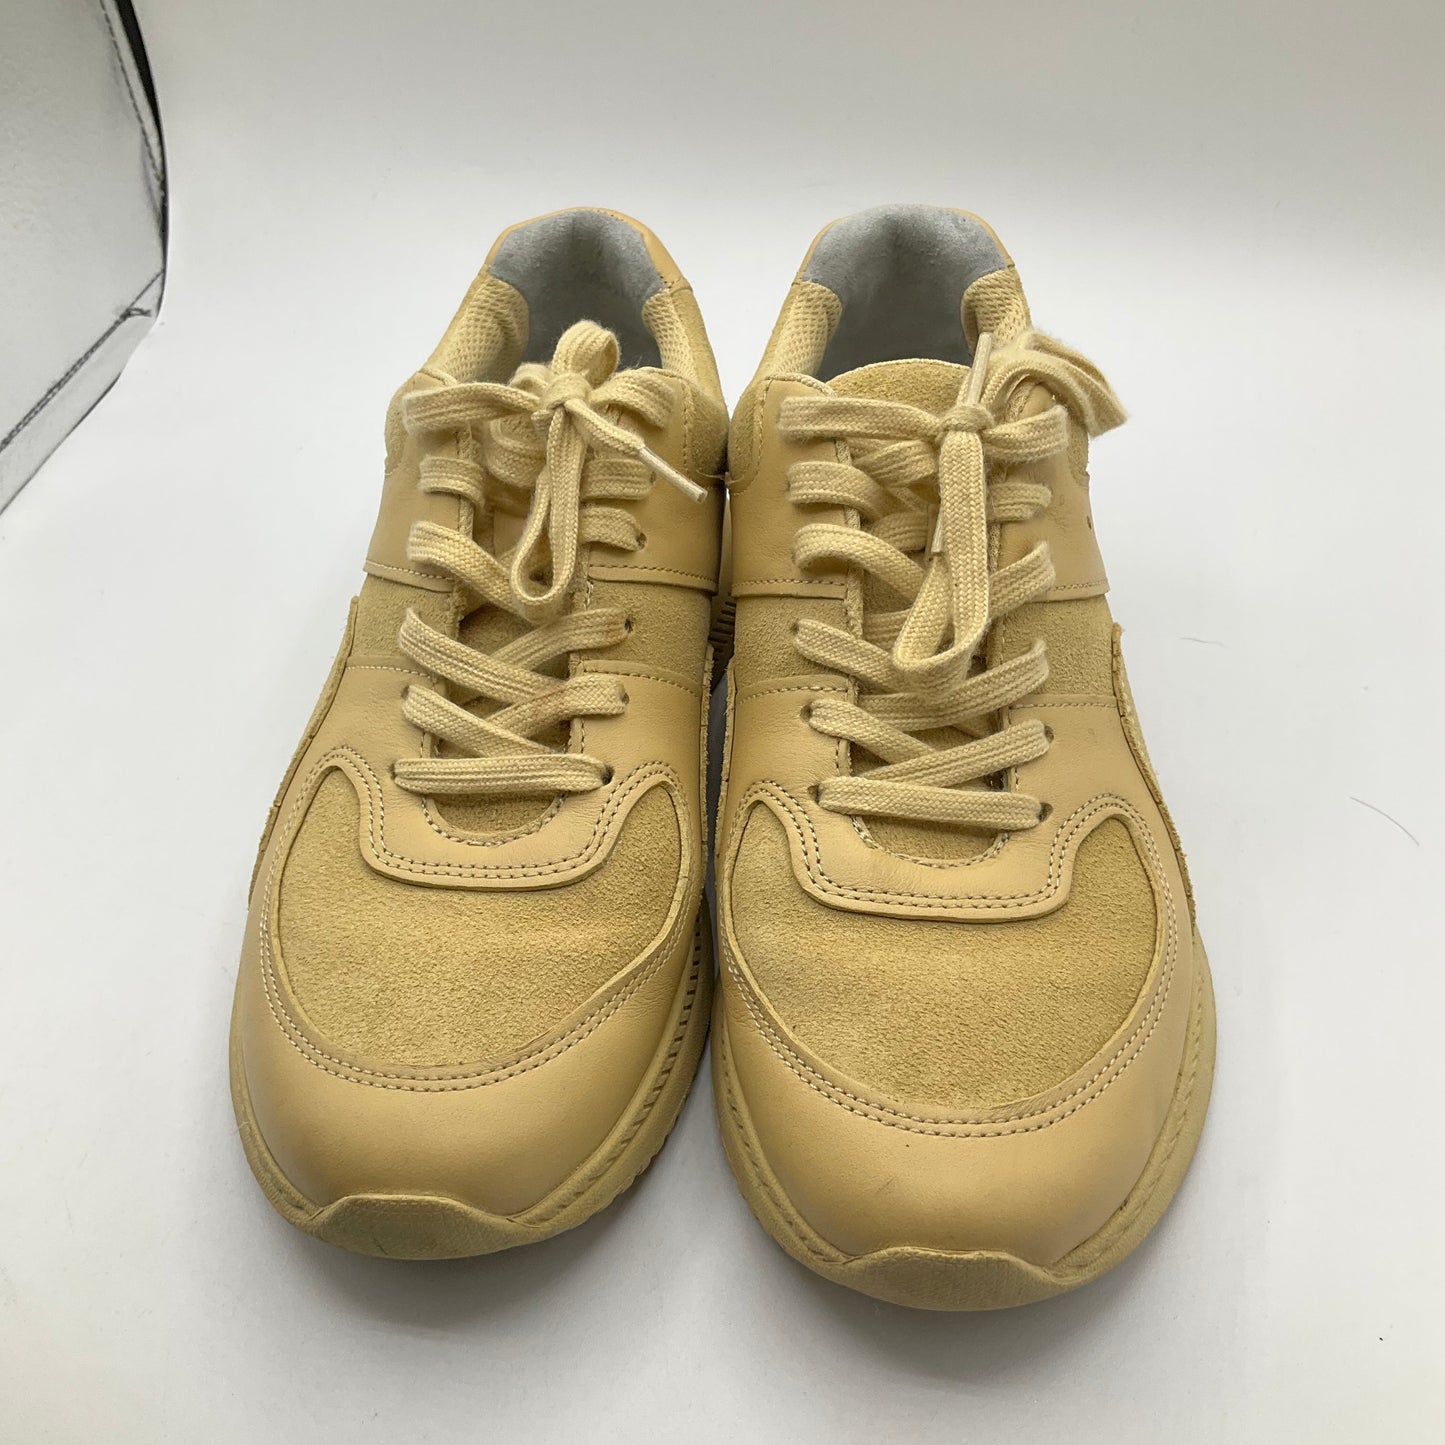 Beige Shoes Sneakers Everlane, Size 8